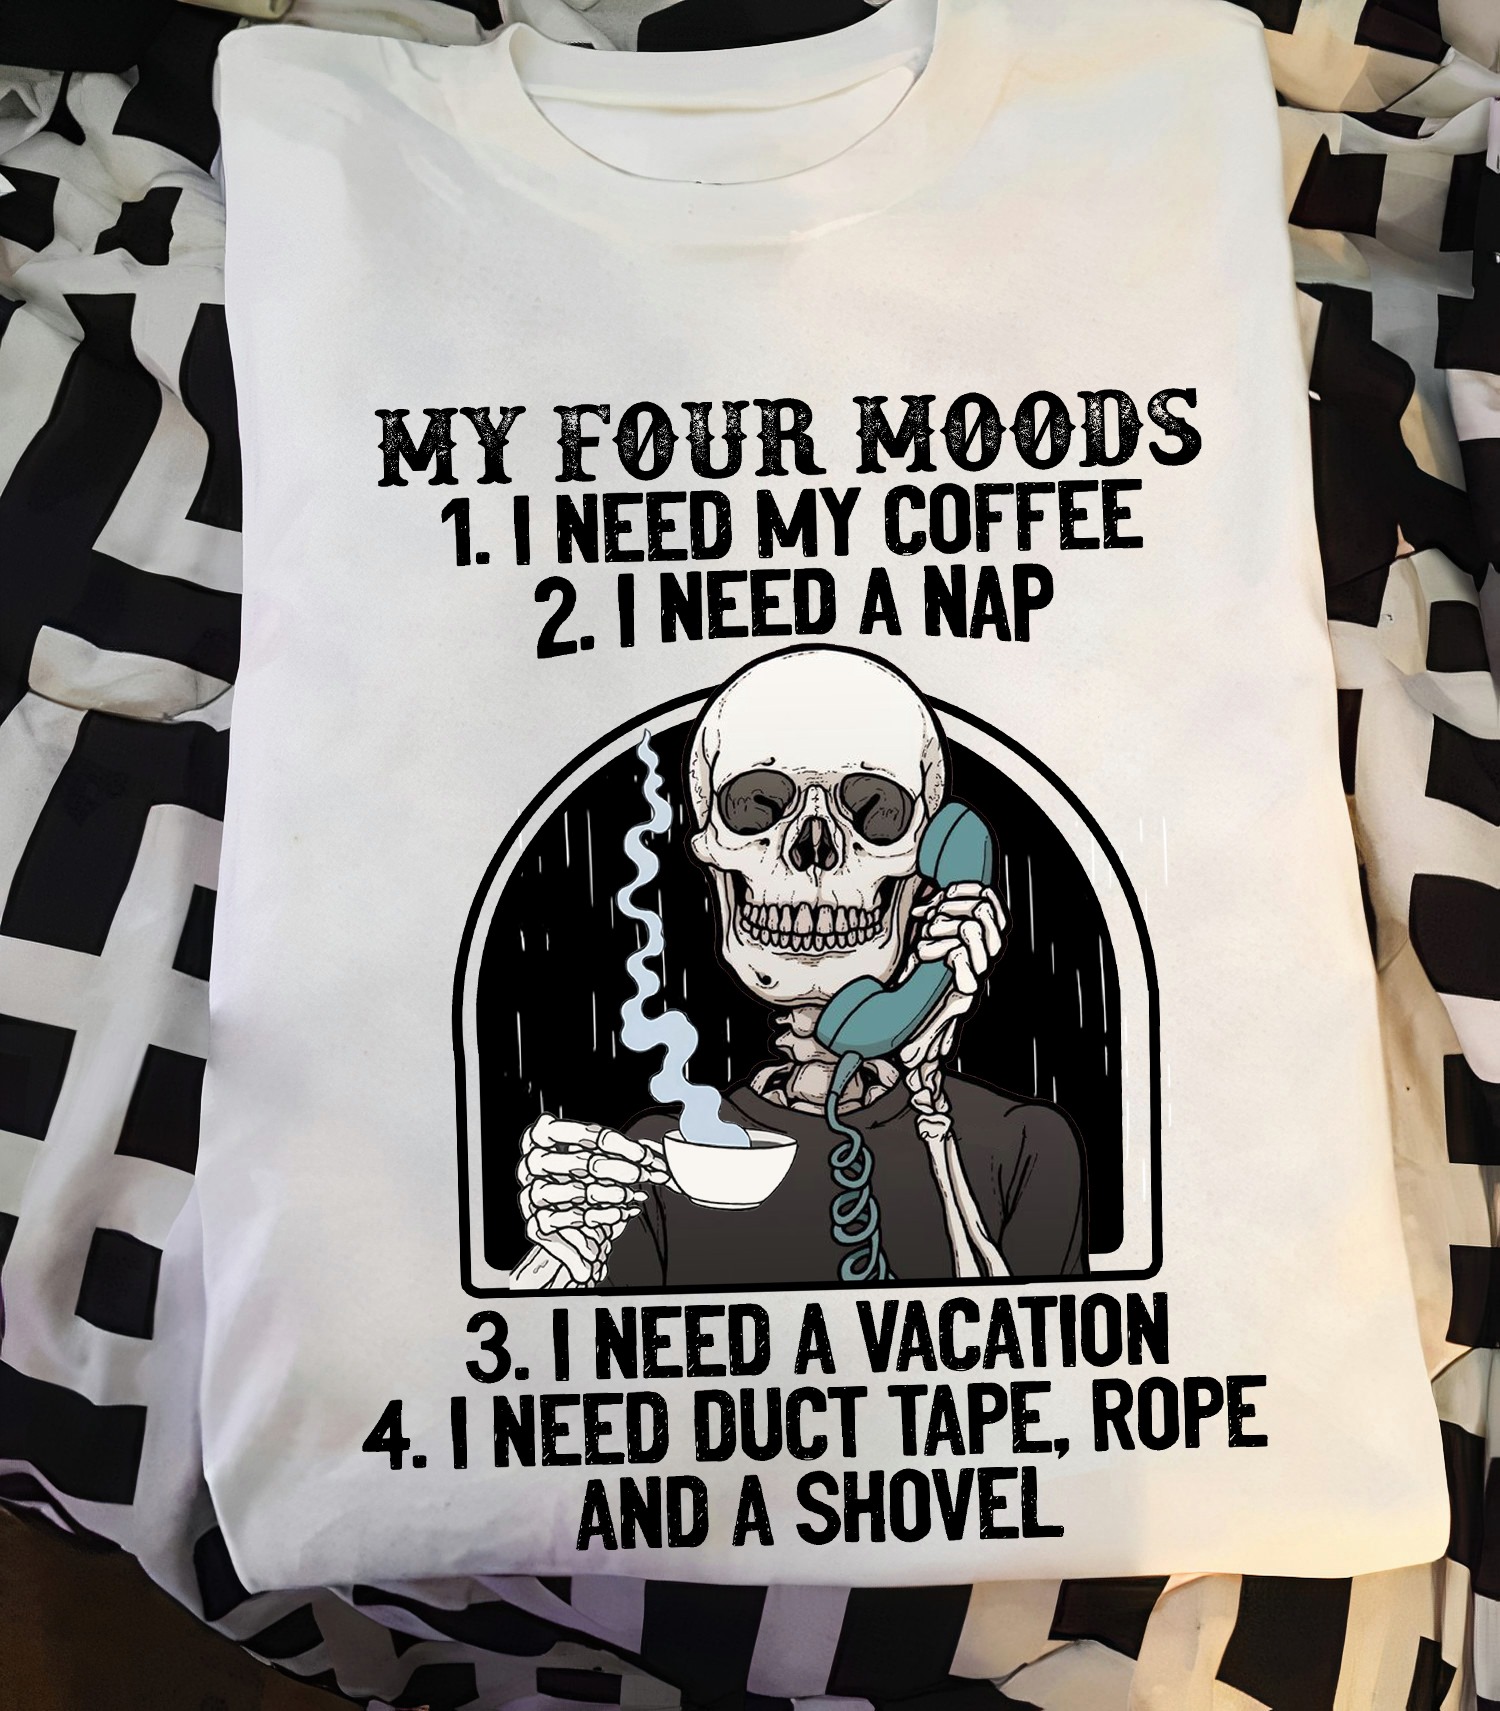 My four moods, Need coffee, need a nap, need a vacation - Coffee lover T-shirt